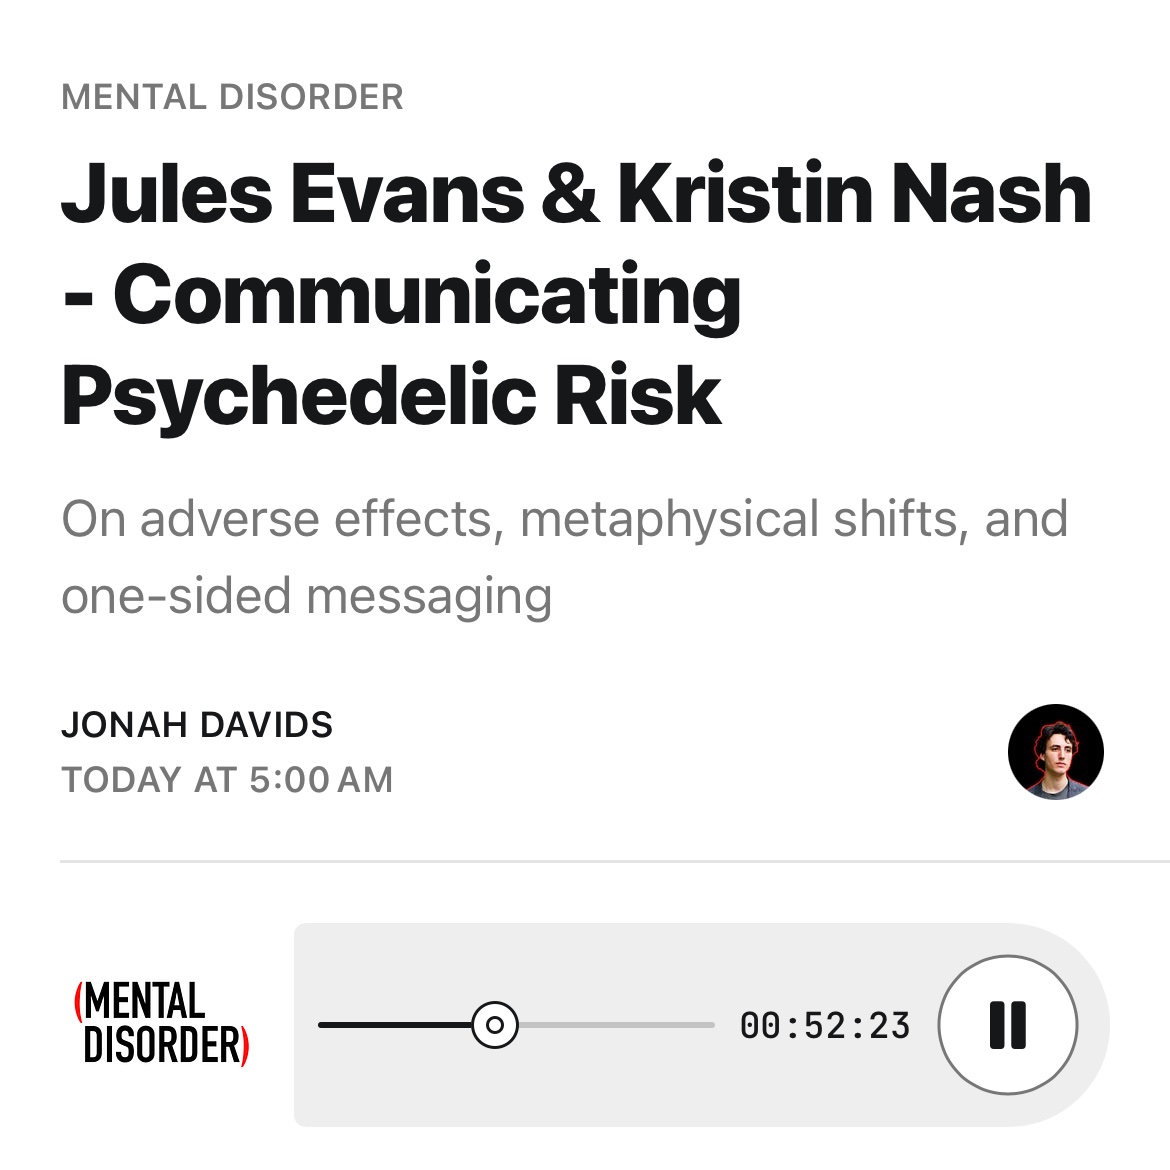 Once demonized, now overhyped, we have yet to find a balanced way to talk about psychedelics and their risks. @JulesEvans11 and Kristin Nash join me to discuss how policymakers and public health officials can get the message right. mentaldisorder.ca/p/jules-evans-…